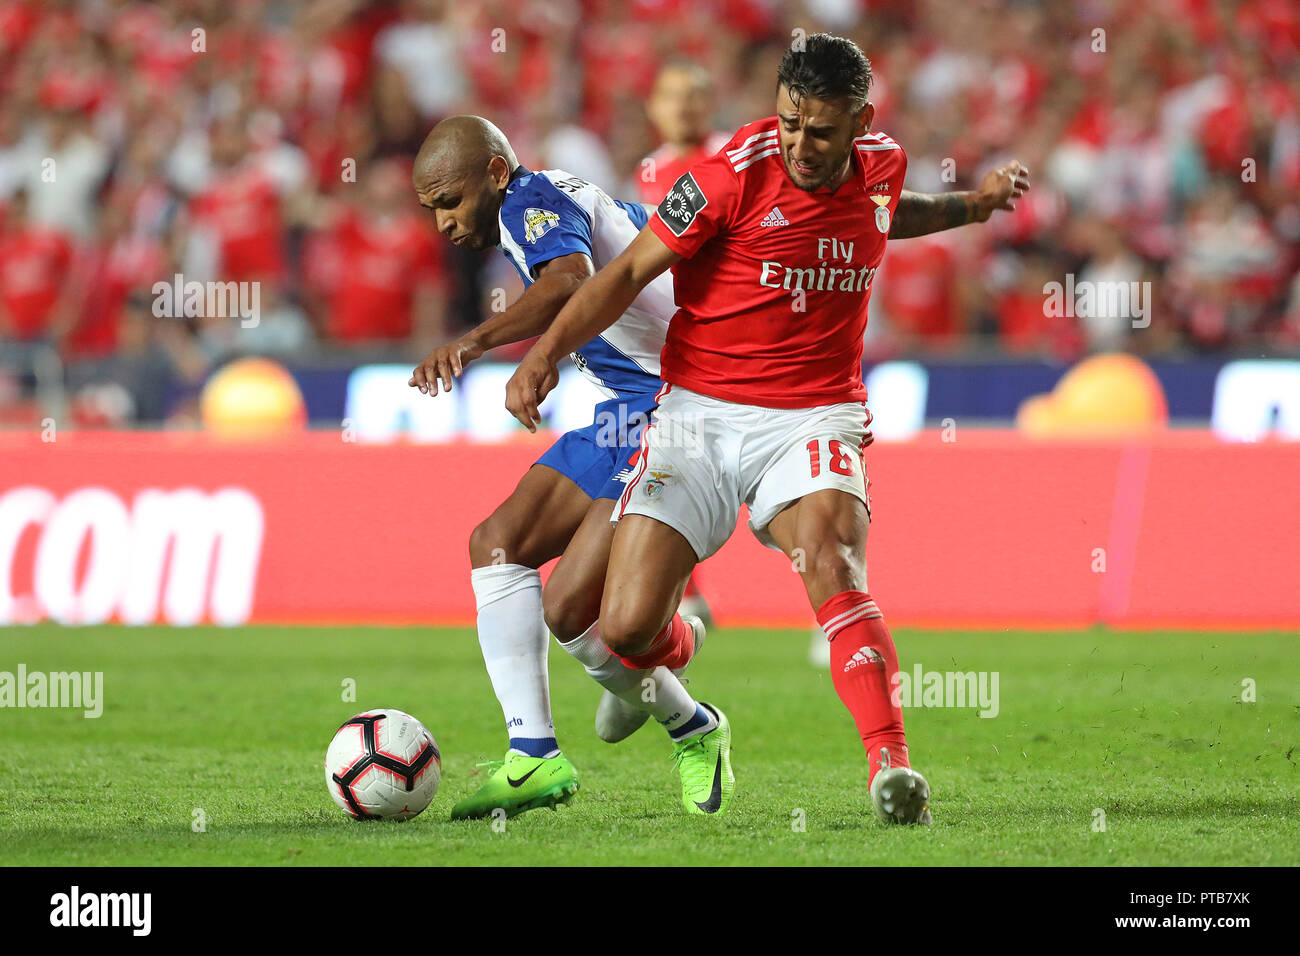 Yacine Brahimi of FC Porto (L) with Toto Salvio of SL Benfica (R) seen in action during League NOS 2018/19 football match between SL Benfica vs FC Porto. (Final score: SL Benfica 1-0 FC Porto. Stock Photo